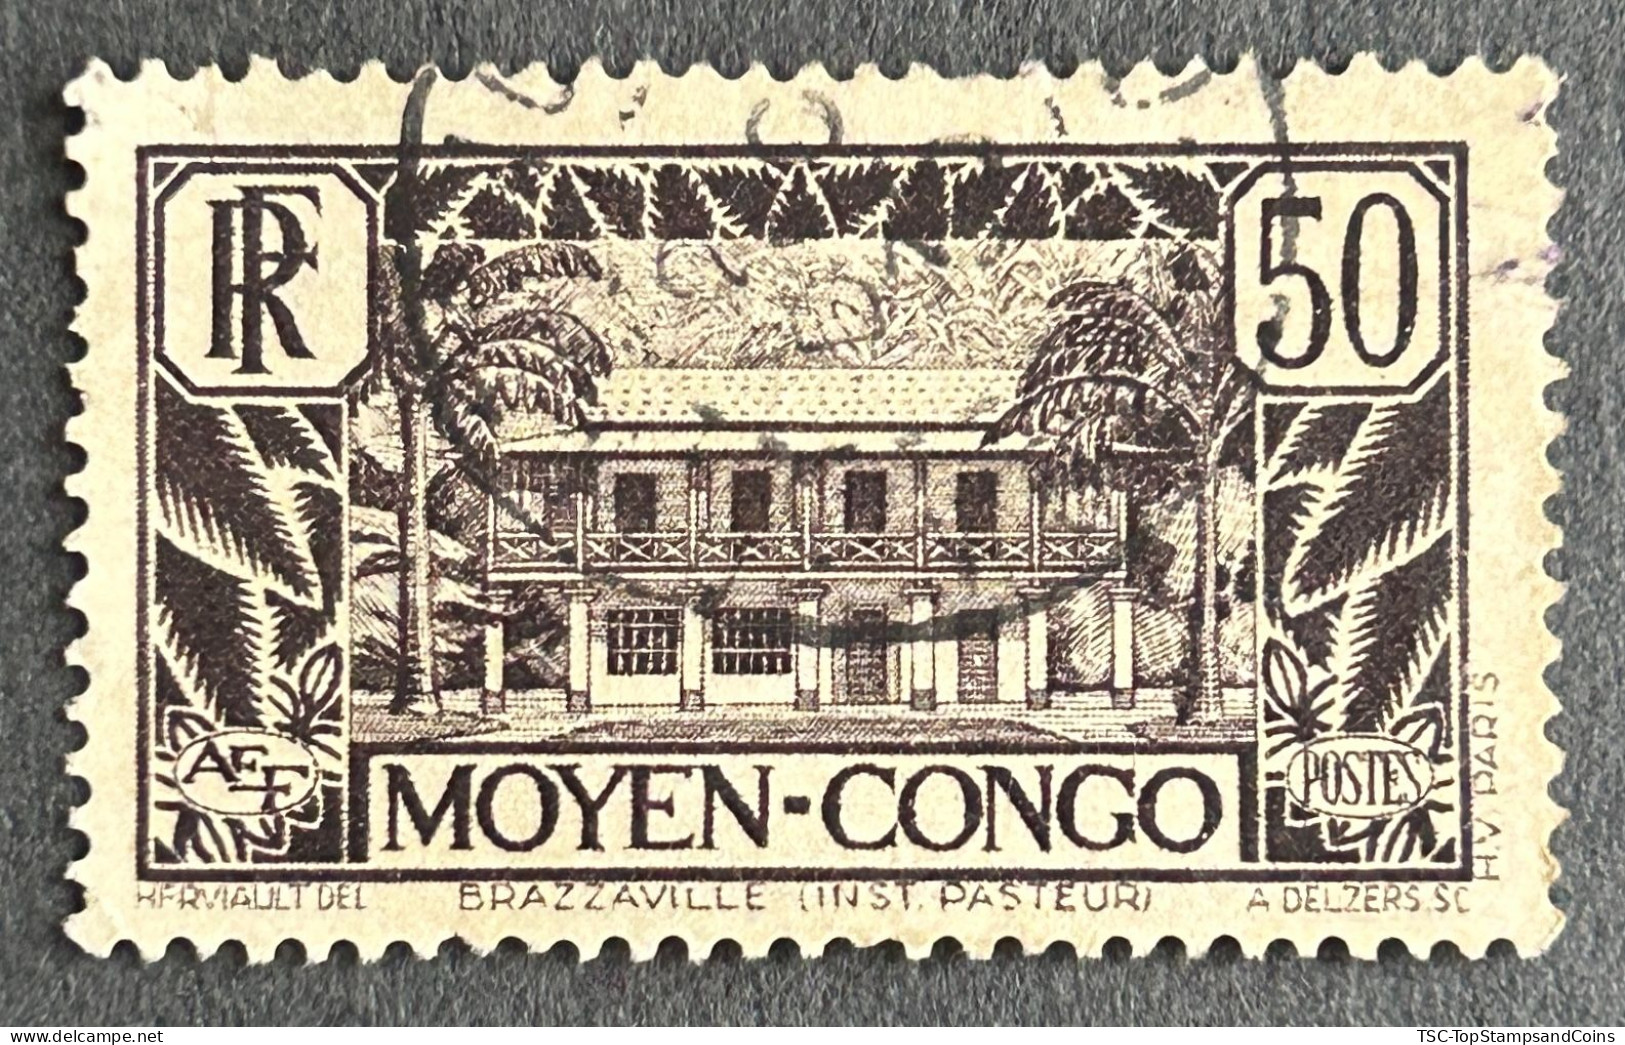 FRCG124U5 - Brazzaville - Pasteur Institute - 50 C Used Stamp - Middle Congo - 1933 - Used Stamps